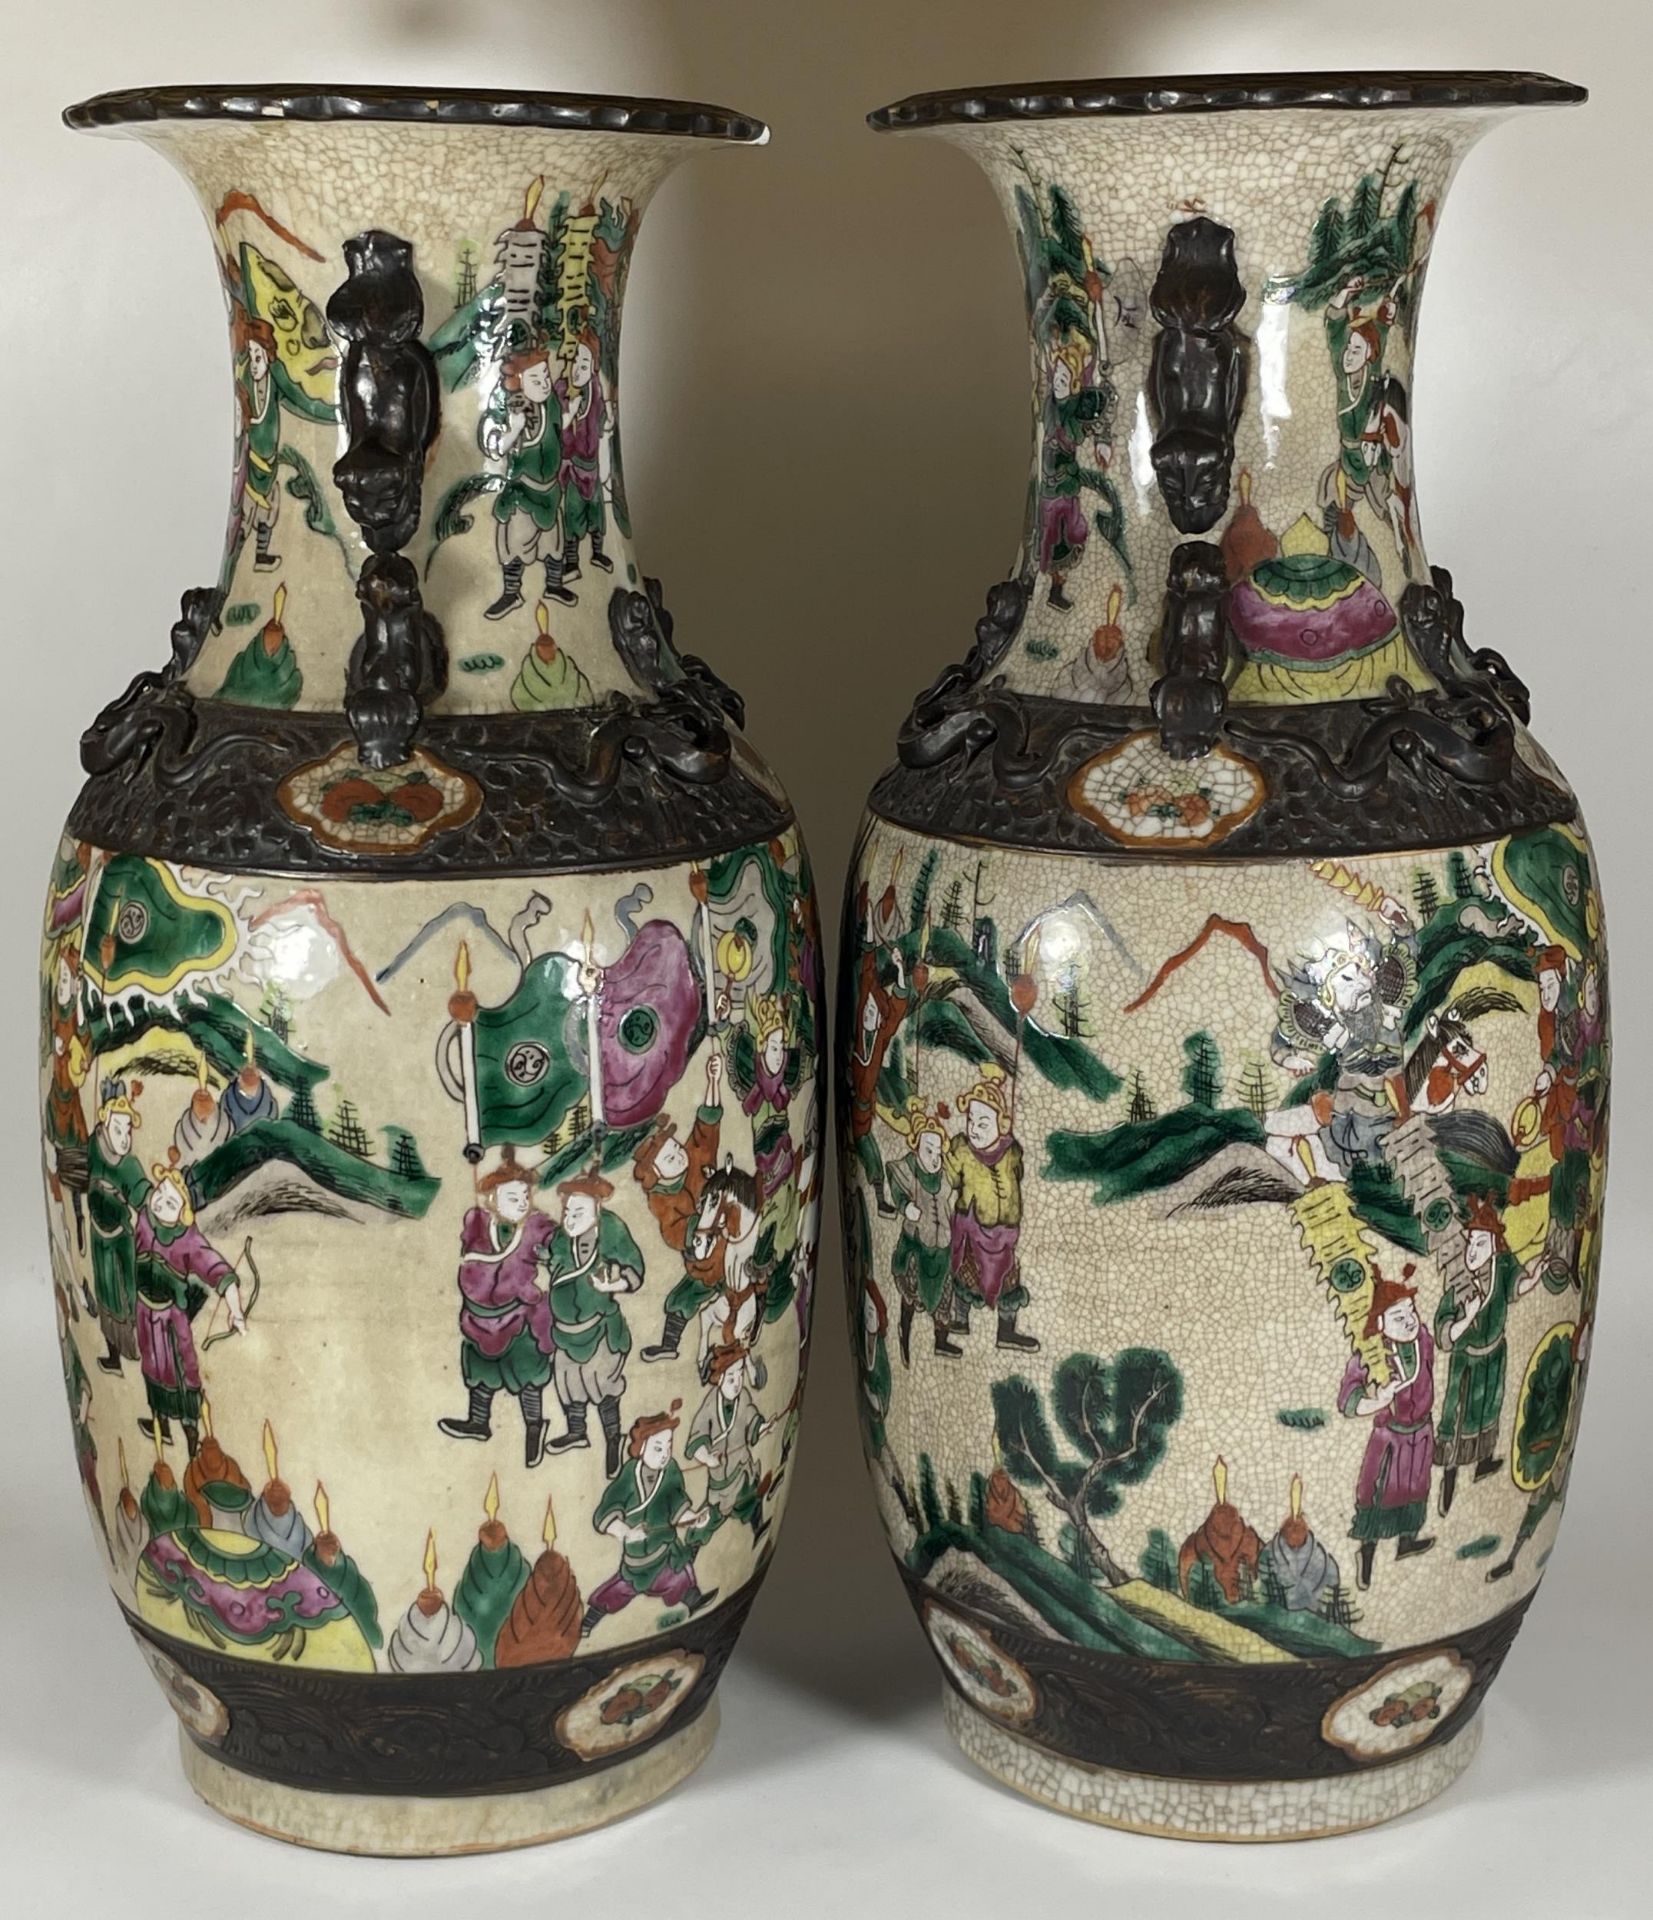 A HUGE PAIR OF CHINESE LATE 19TH / EARLY 20TH CENTURY CRACKLE GLAZE PORCELAIN VASES DEPICTING - Image 5 of 8